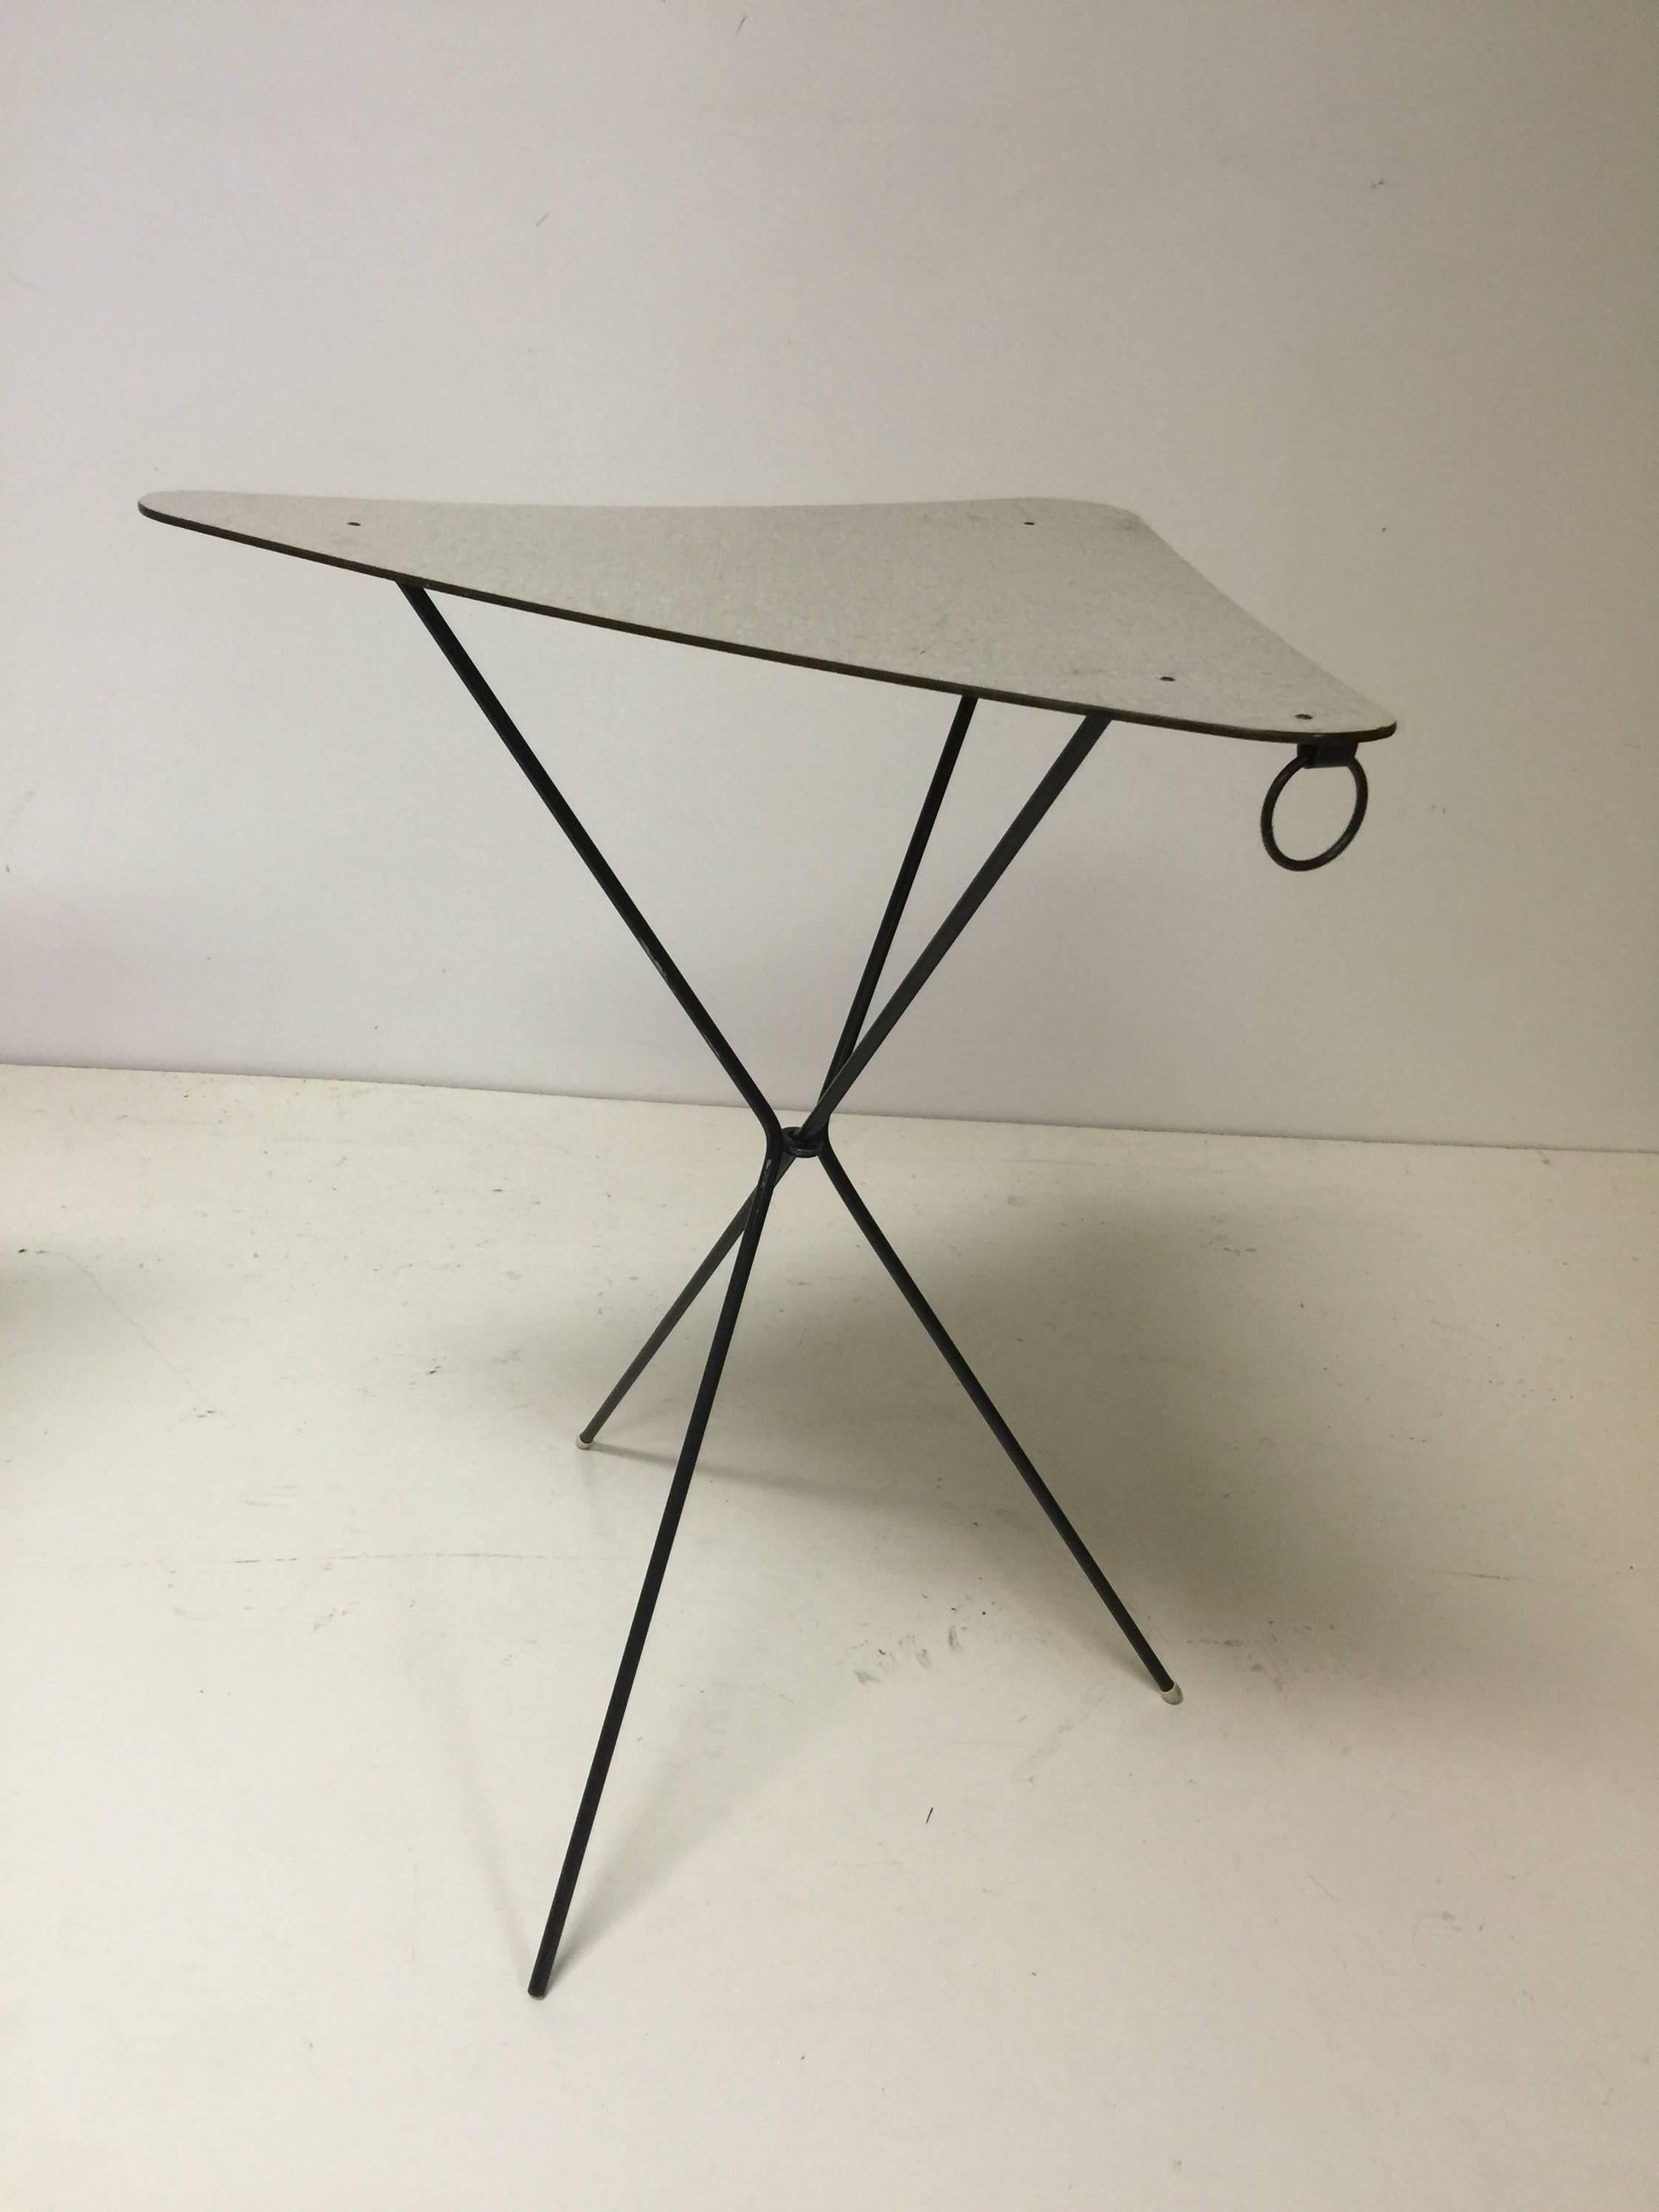 Pair of French Triangular Cocktail Tables by Mathieu Matégot, circa 1950s In Good Condition For Sale In Mount Penn, PA